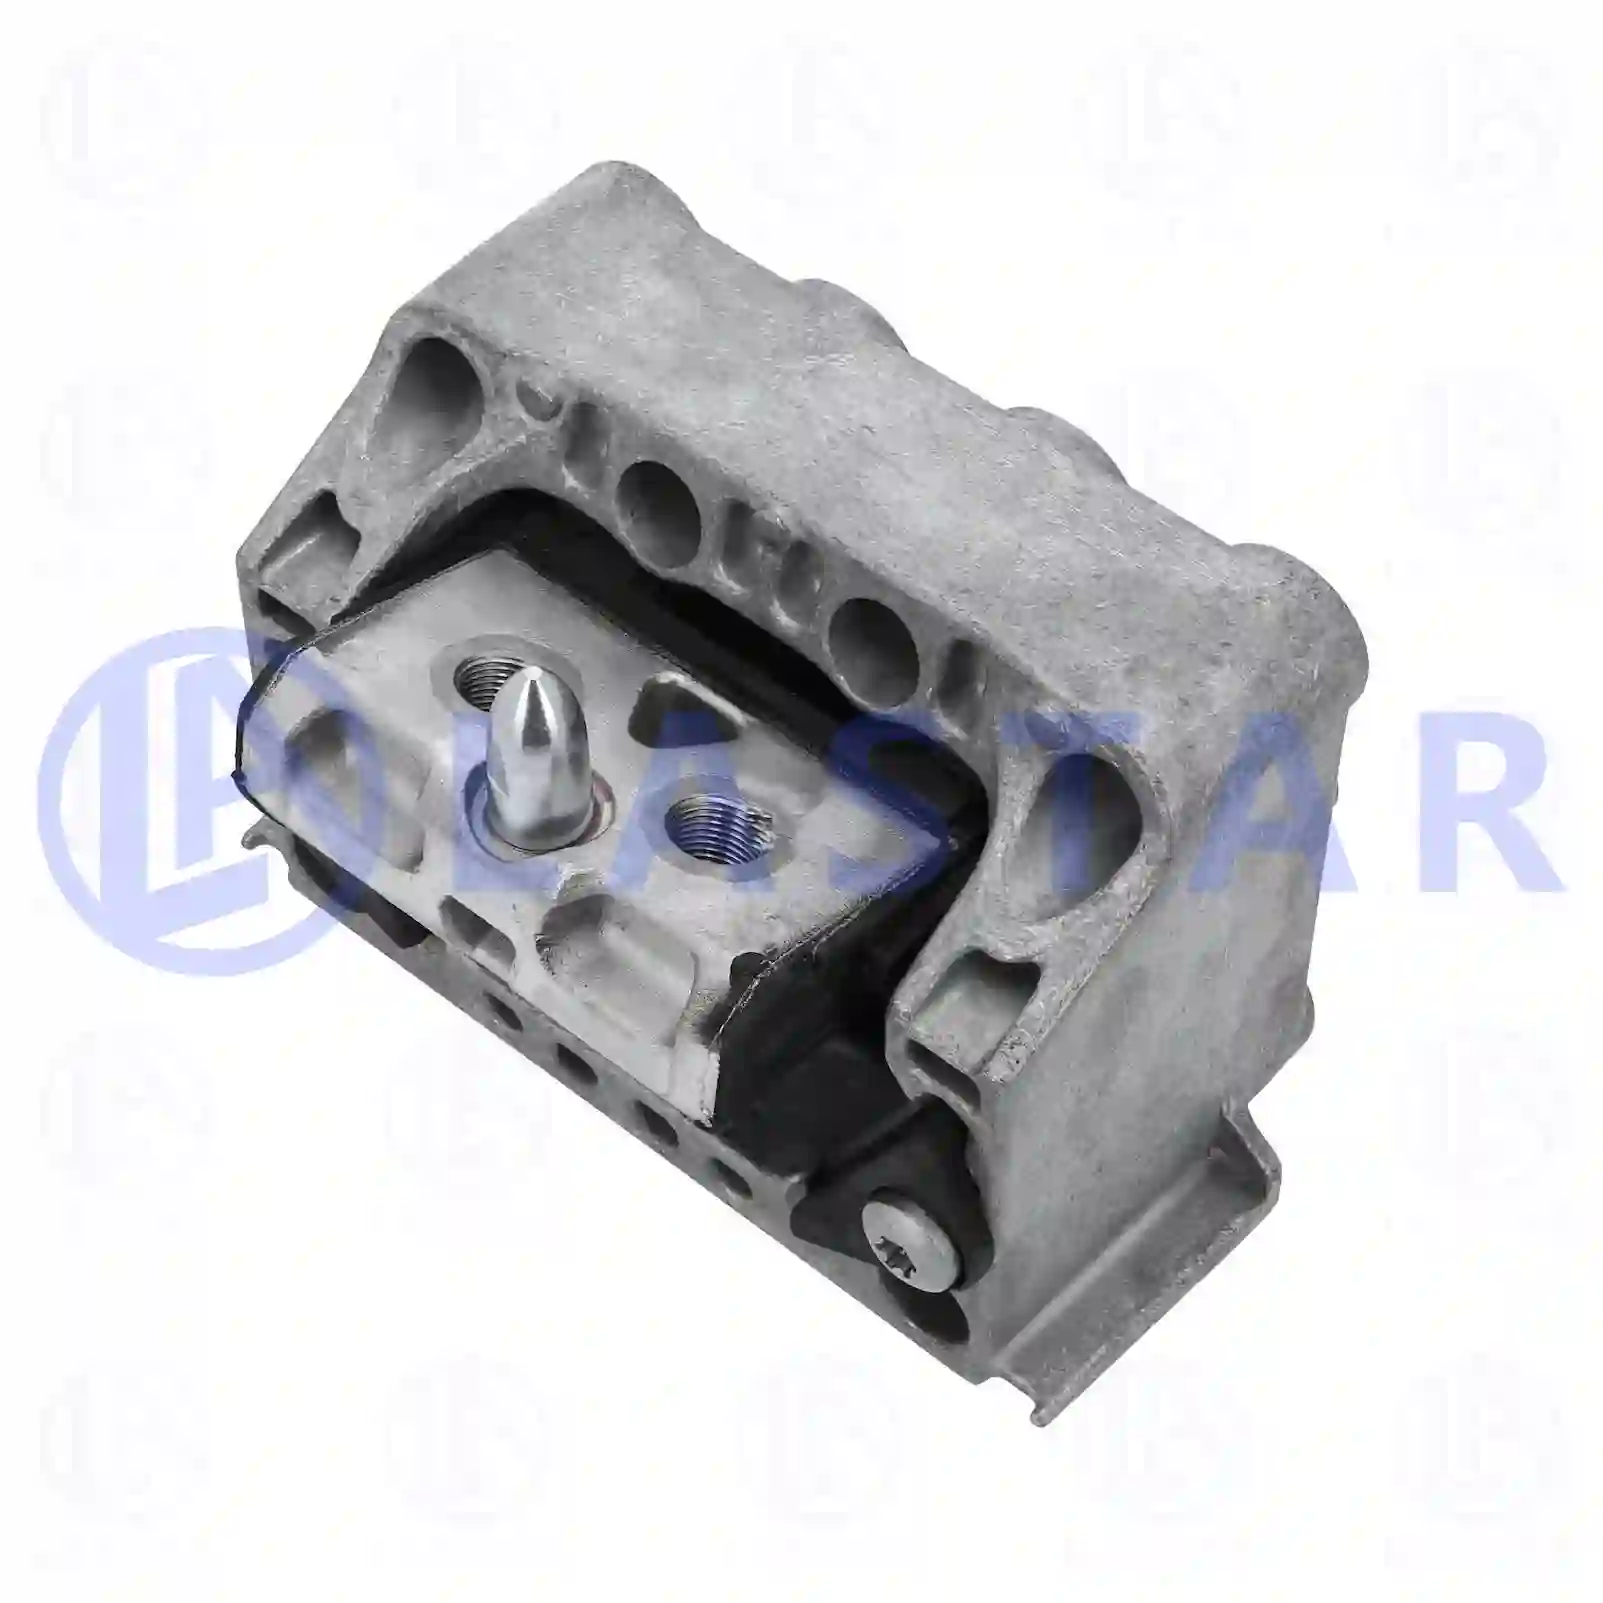 Engine mounting, 77702452, 9602417213, 96024 ||  77702452 Lastar Spare Part | Truck Spare Parts, Auotomotive Spare Parts Engine mounting, 77702452, 9602417213, 96024 ||  77702452 Lastar Spare Part | Truck Spare Parts, Auotomotive Spare Parts